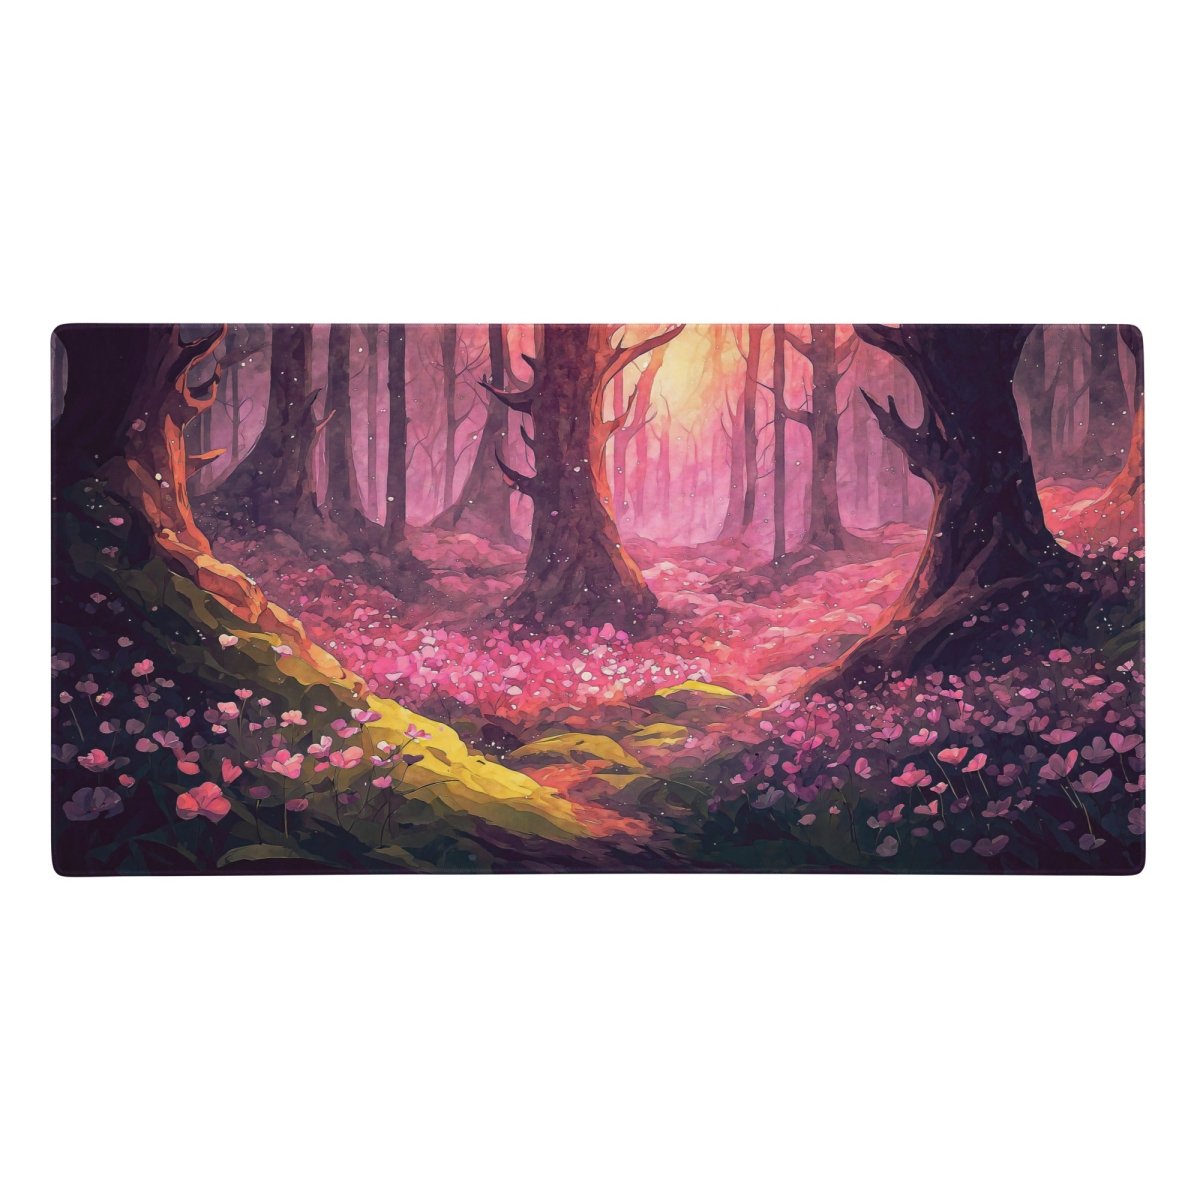 Misty flower grove - Gaming mouse pad - Ever colorful